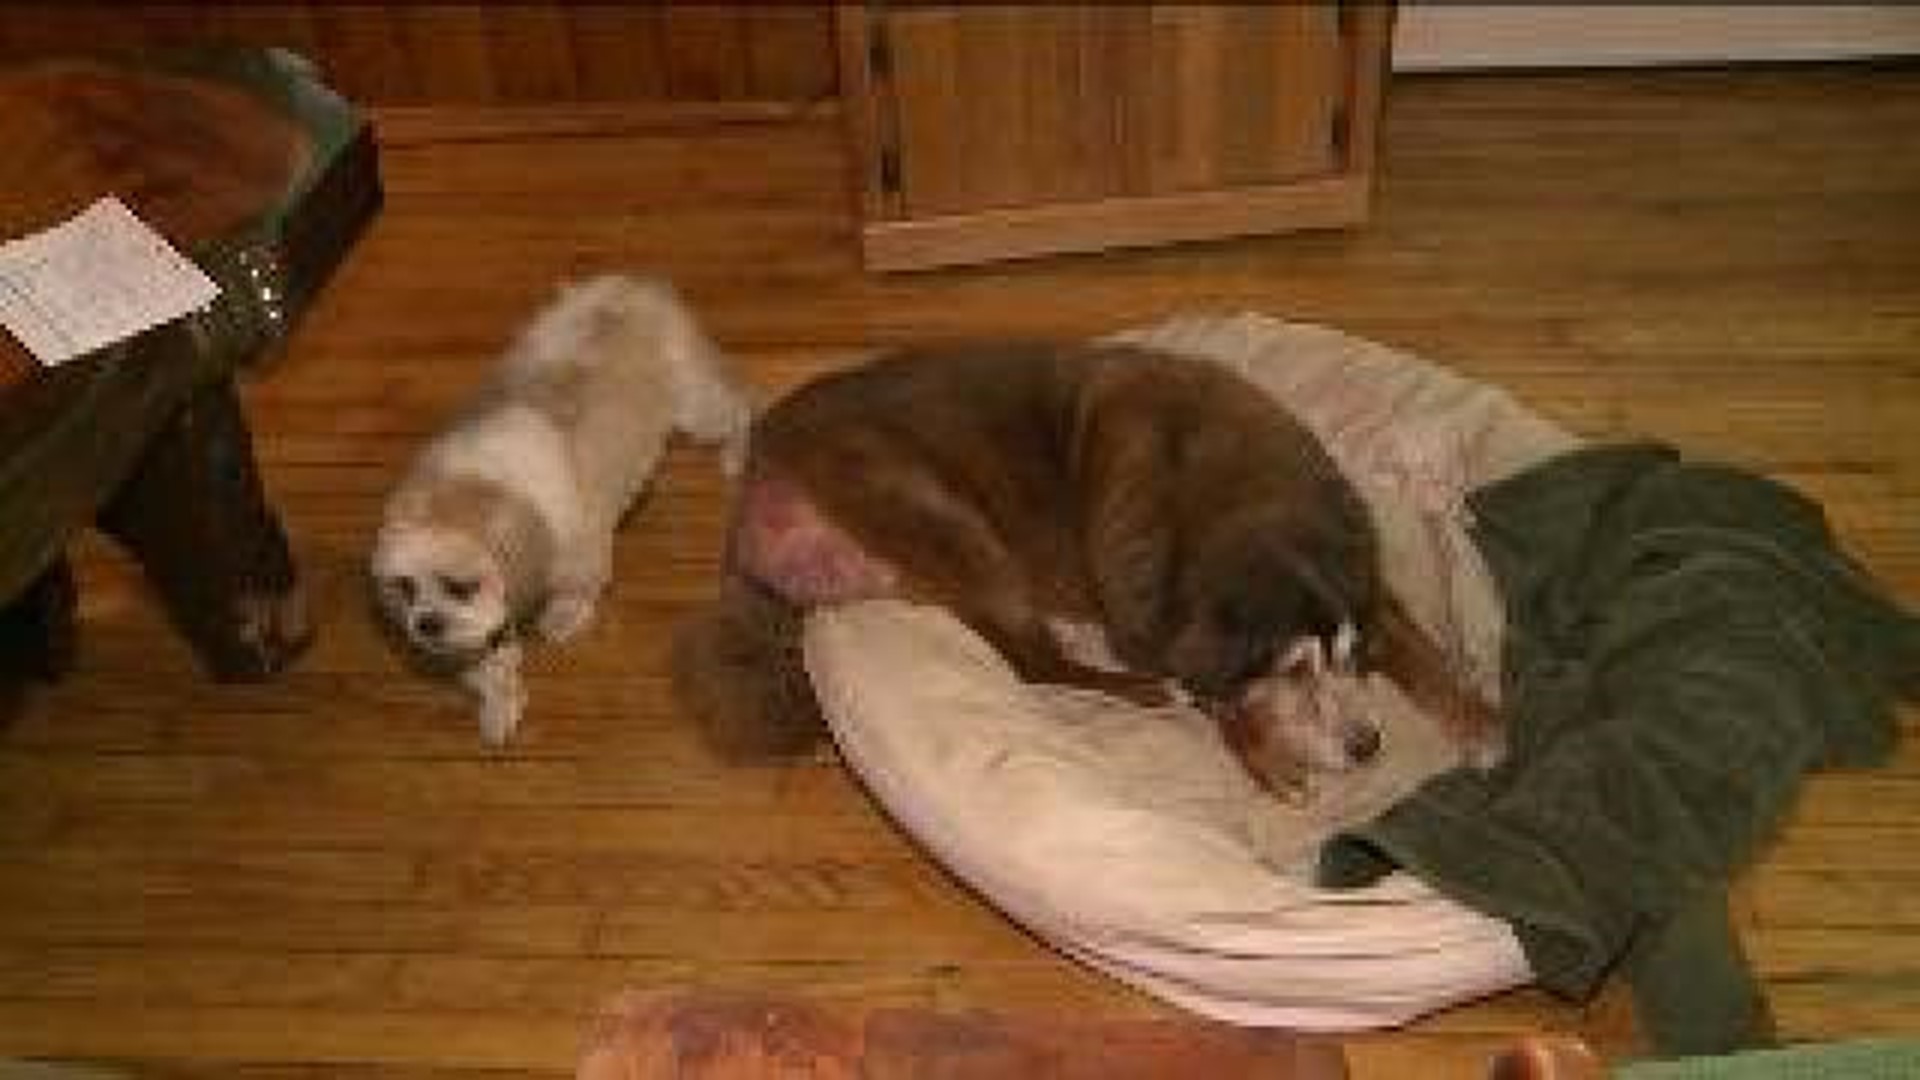 Families Search for Owner of Dogs that Allegedly Attacked People, Pets